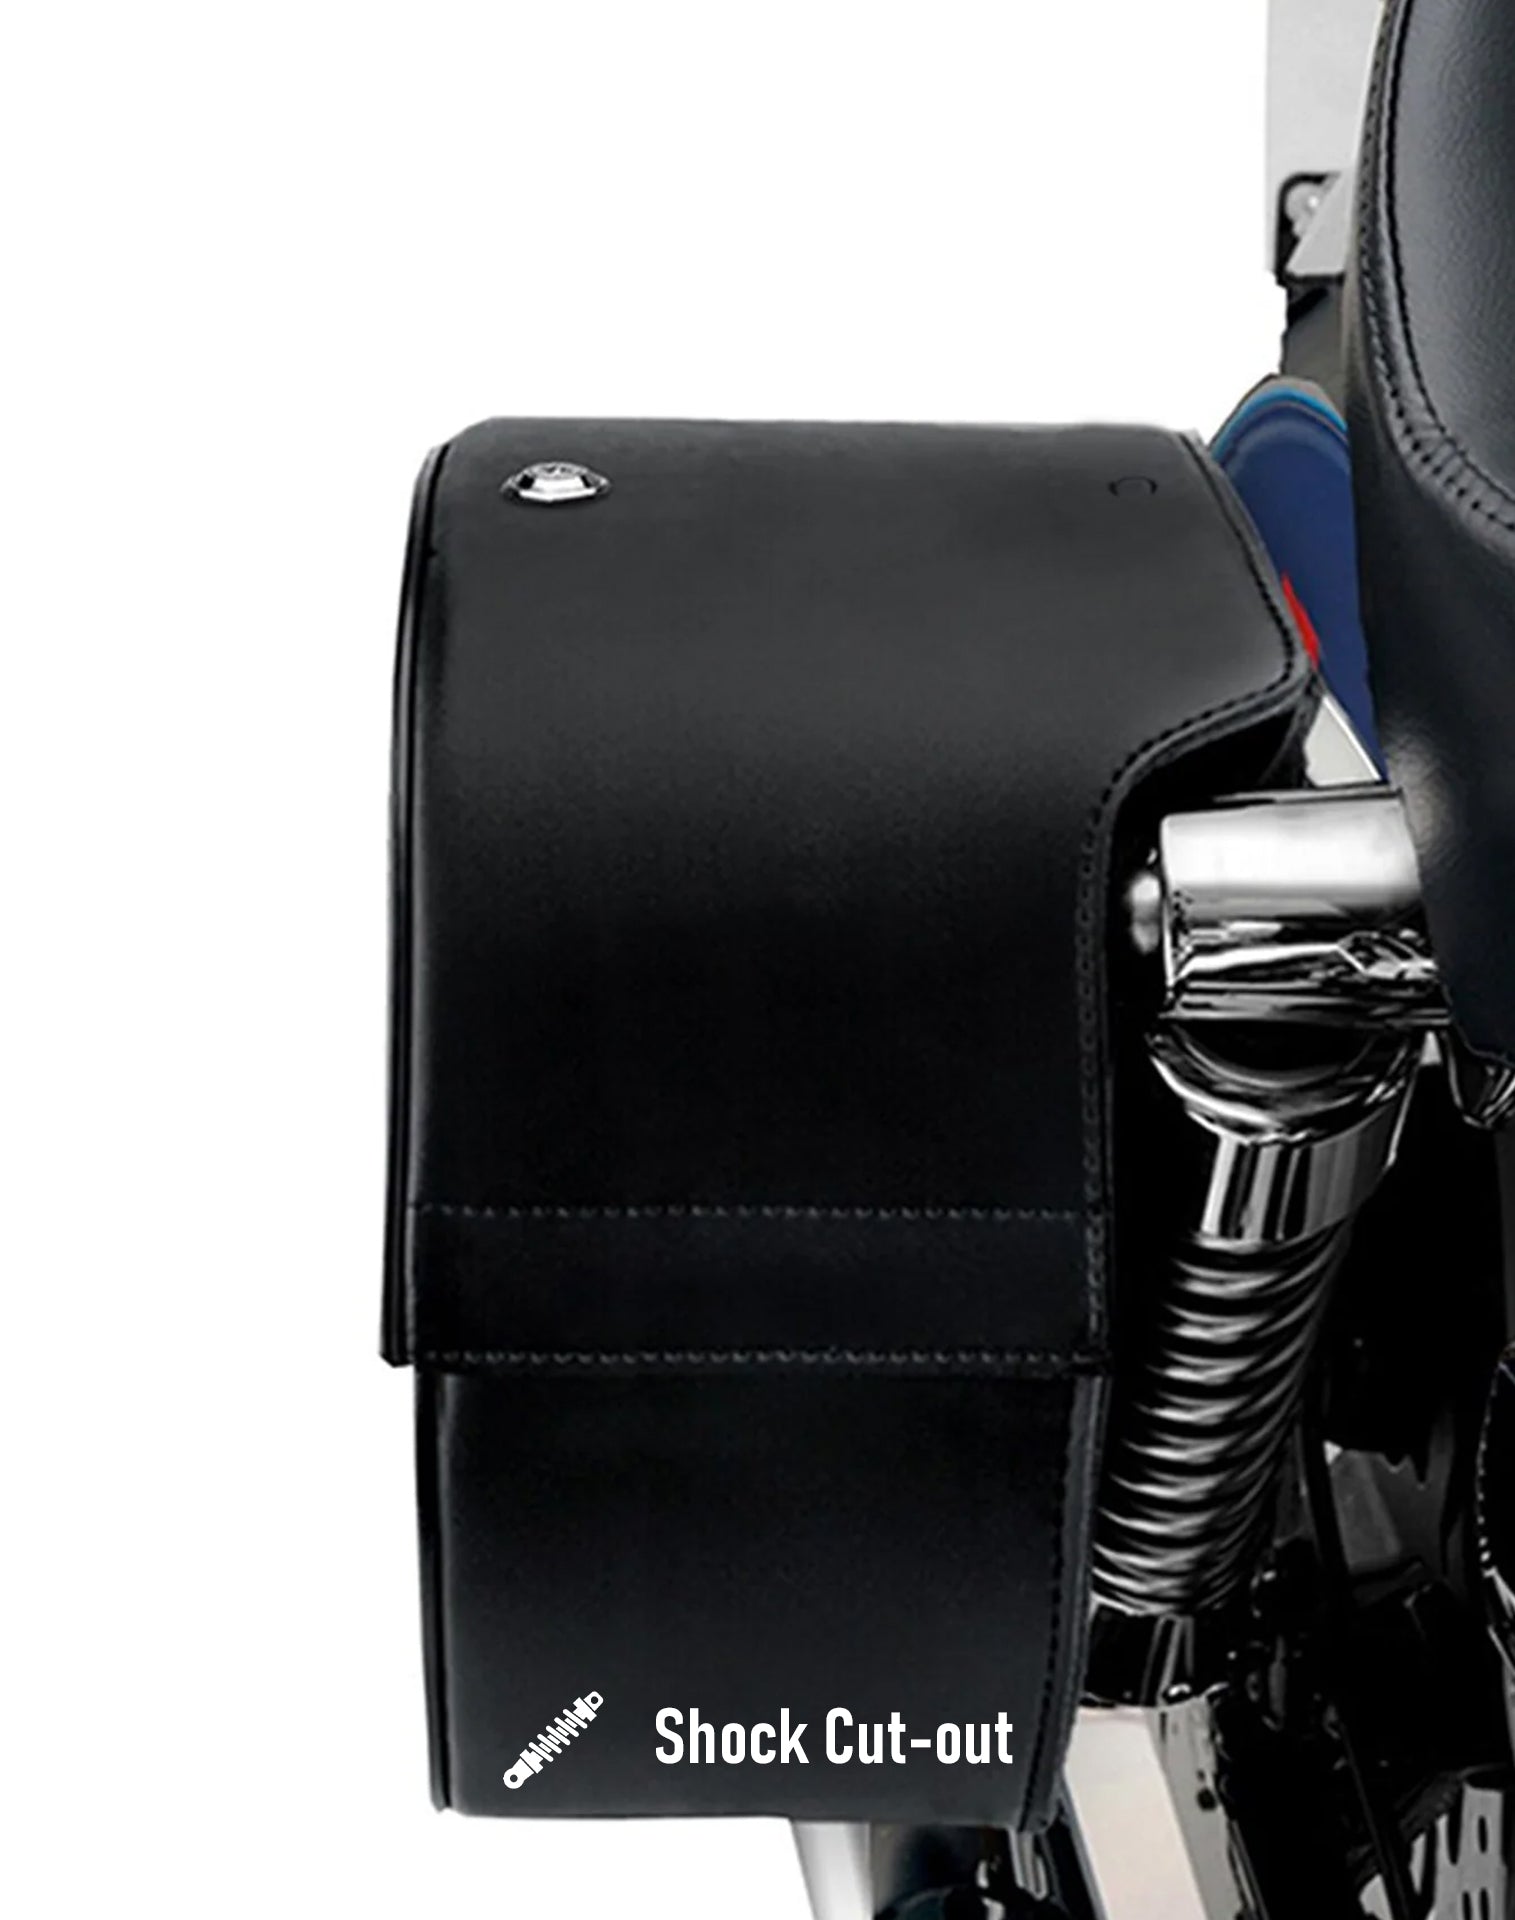 26L - Pantheon Large Shock Cutout Leather Saddlebags for Harley Sportster 883 Iron XL883N